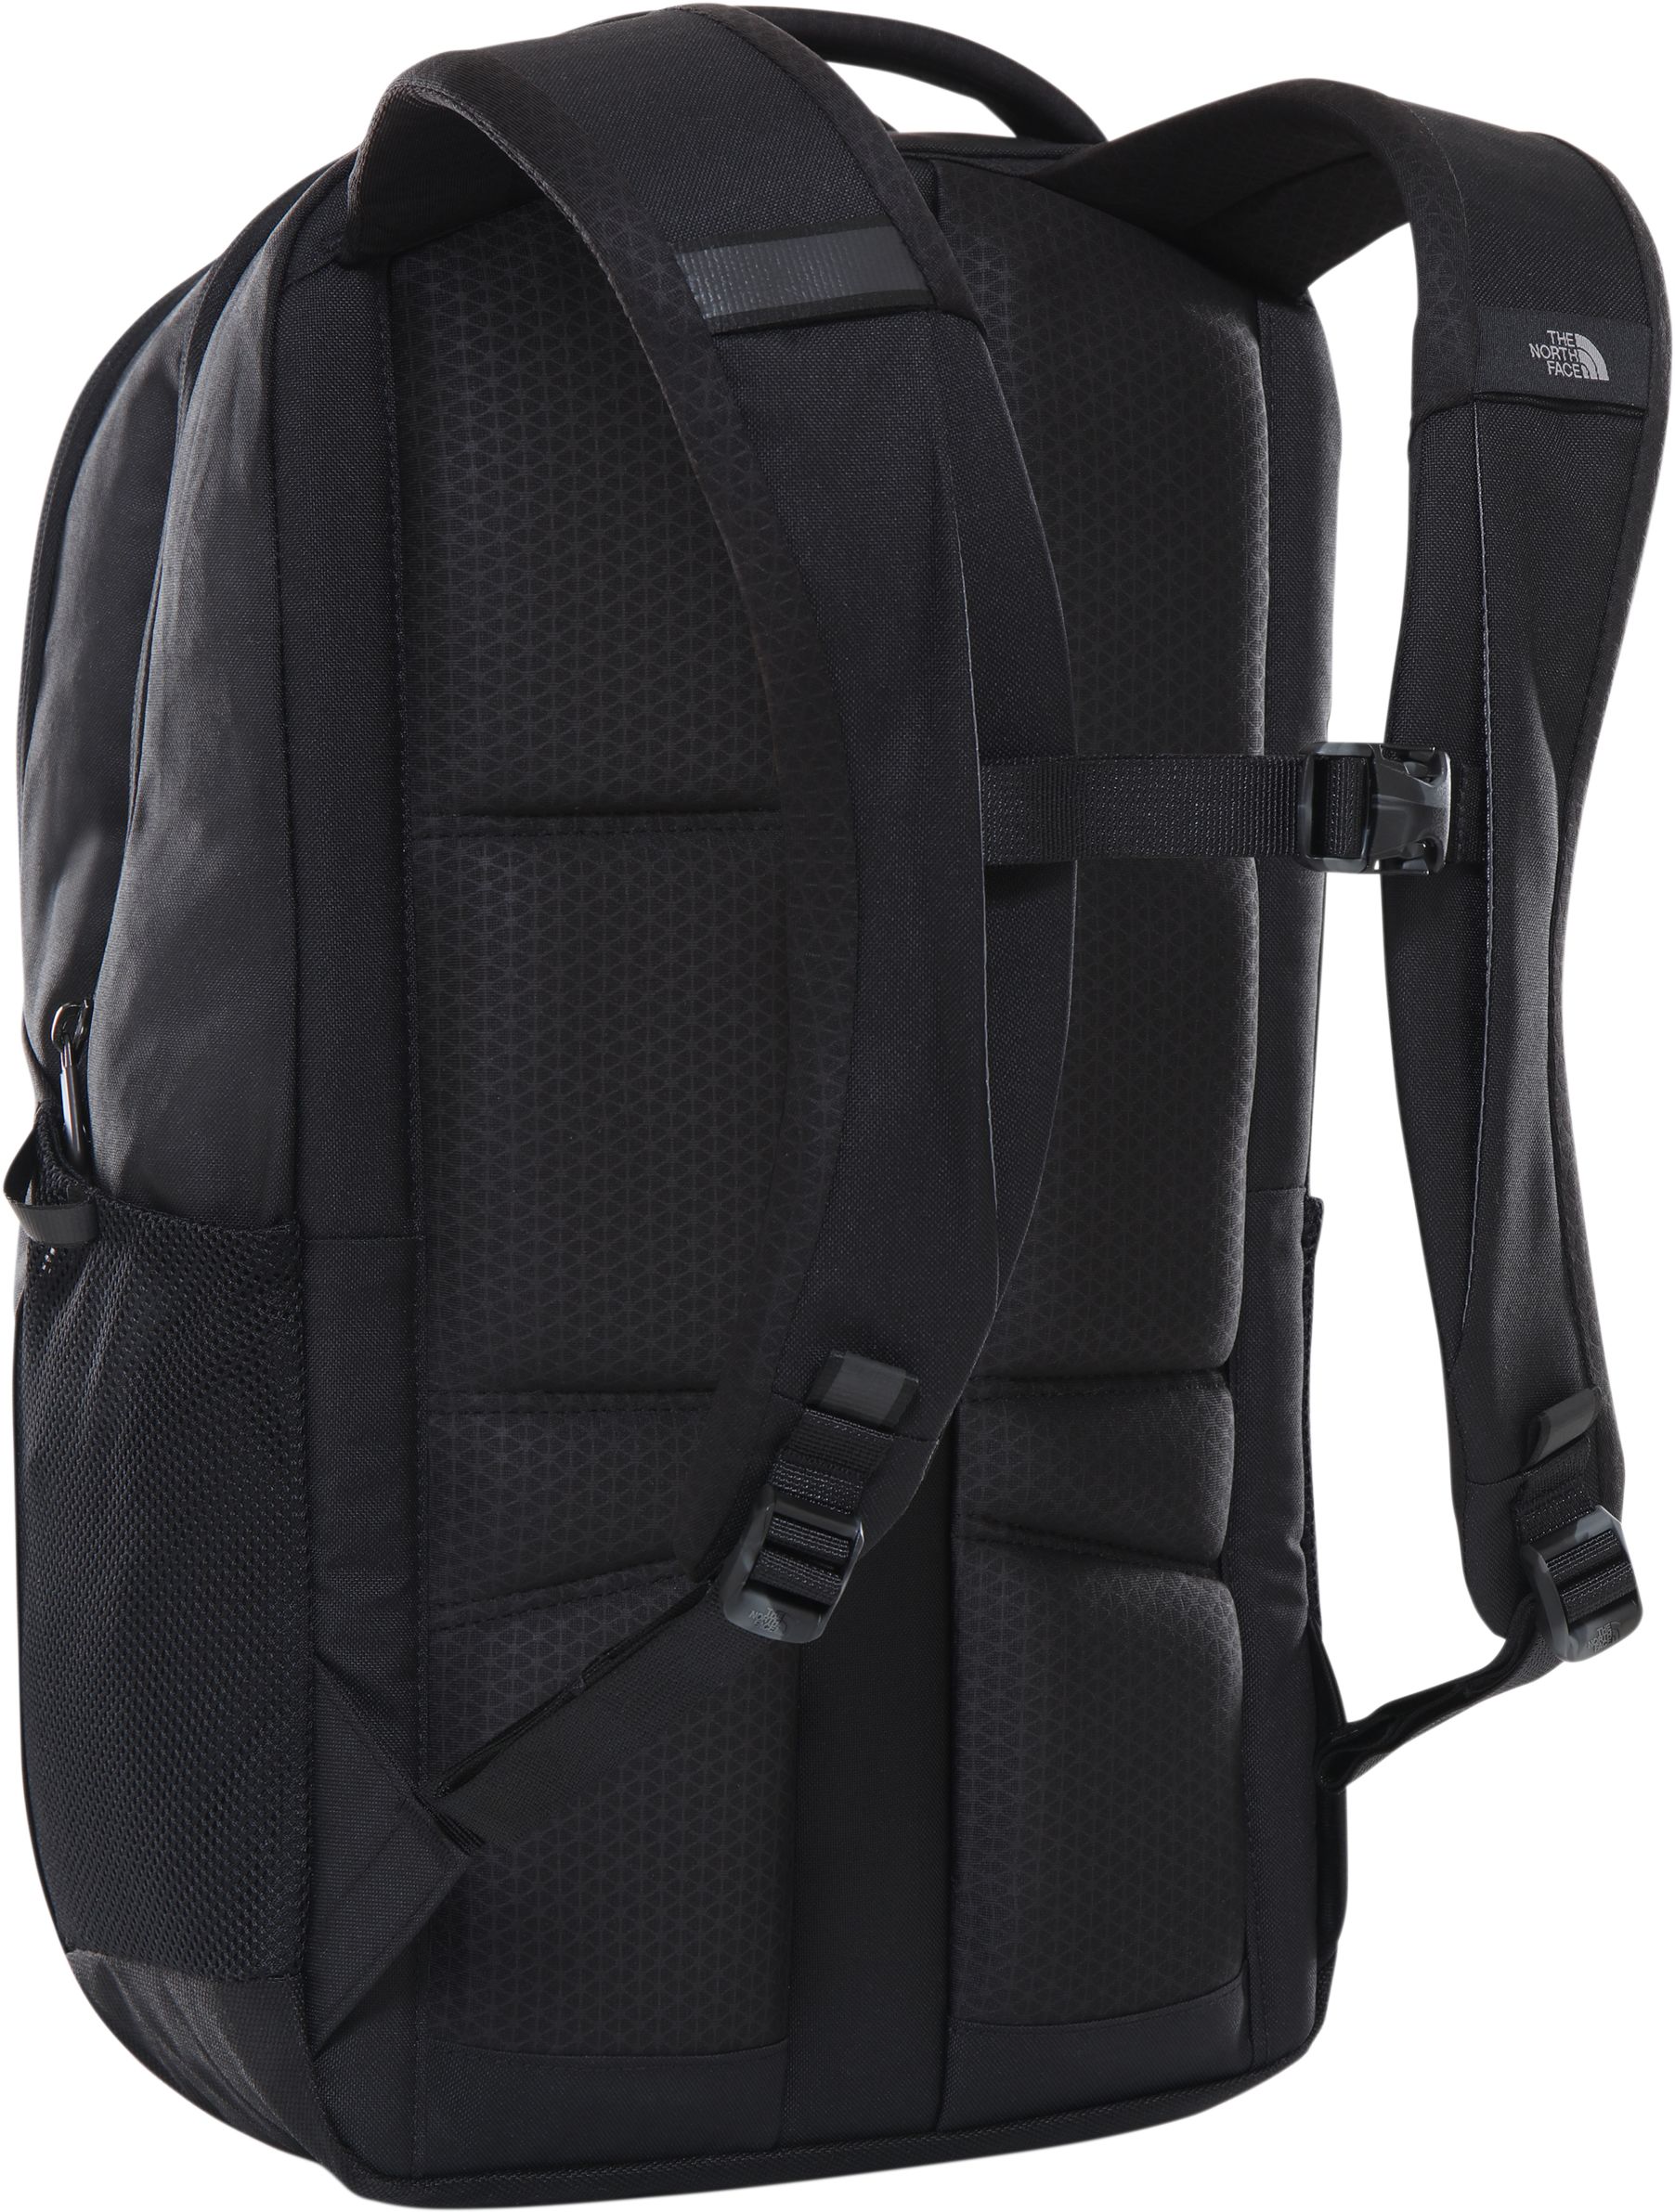 THE NORTH FACE, VAULT BACKPACK